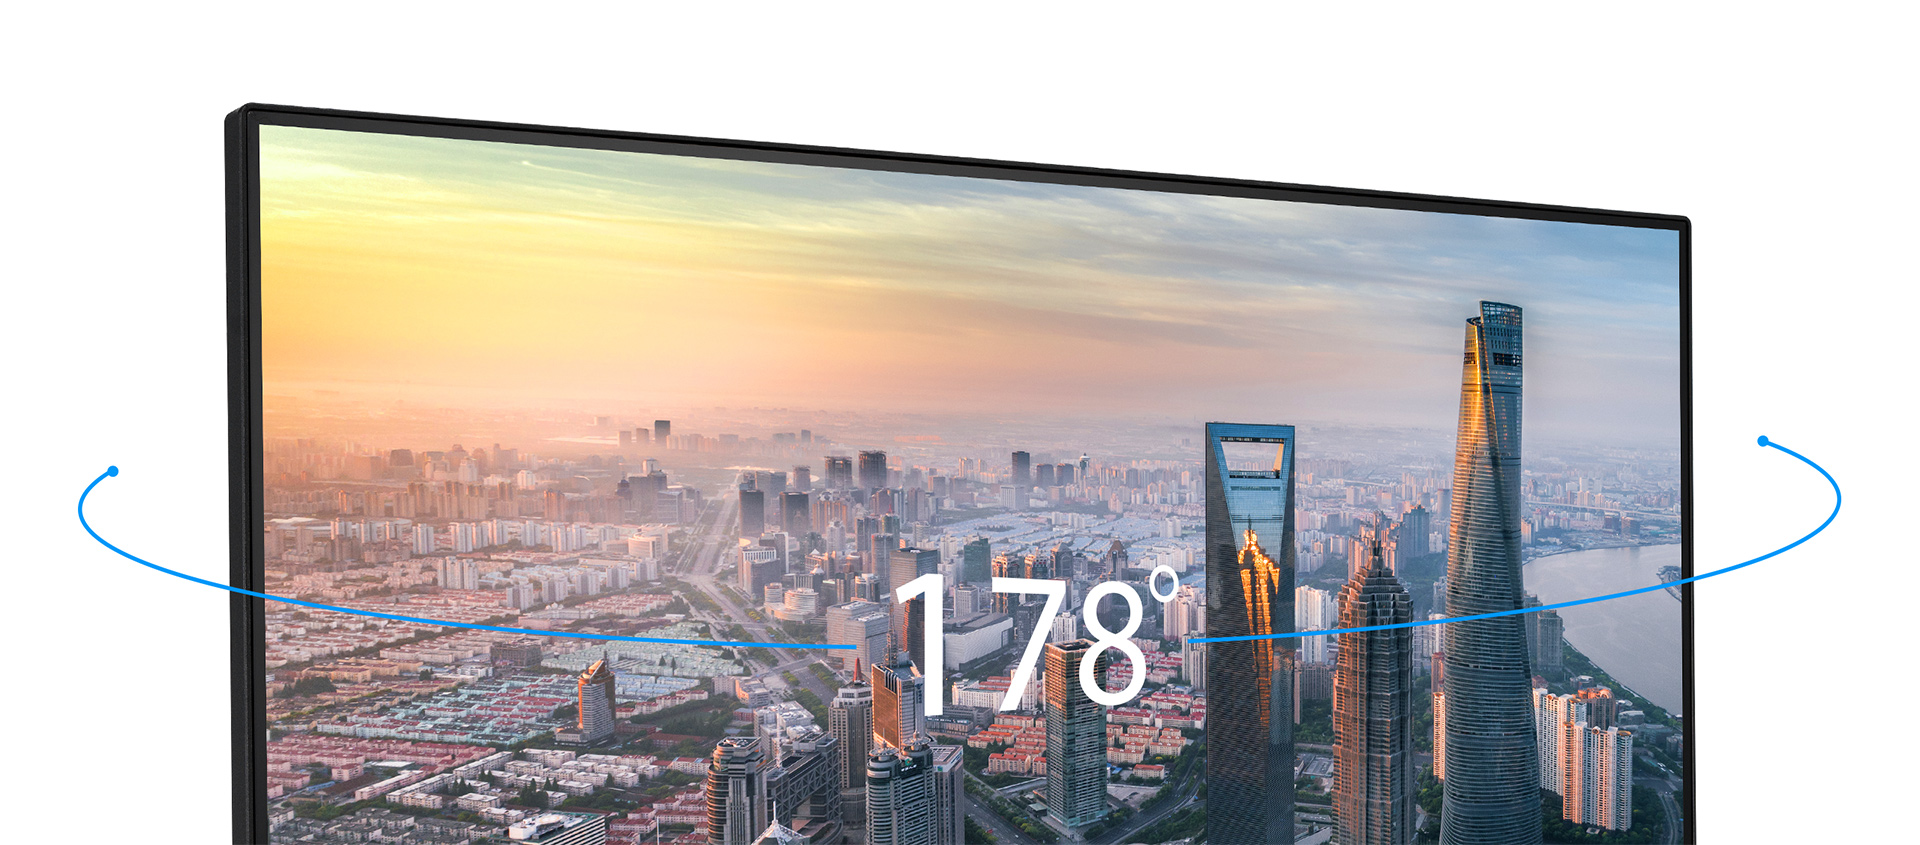 IPS panel features 178 degree viewing angles.